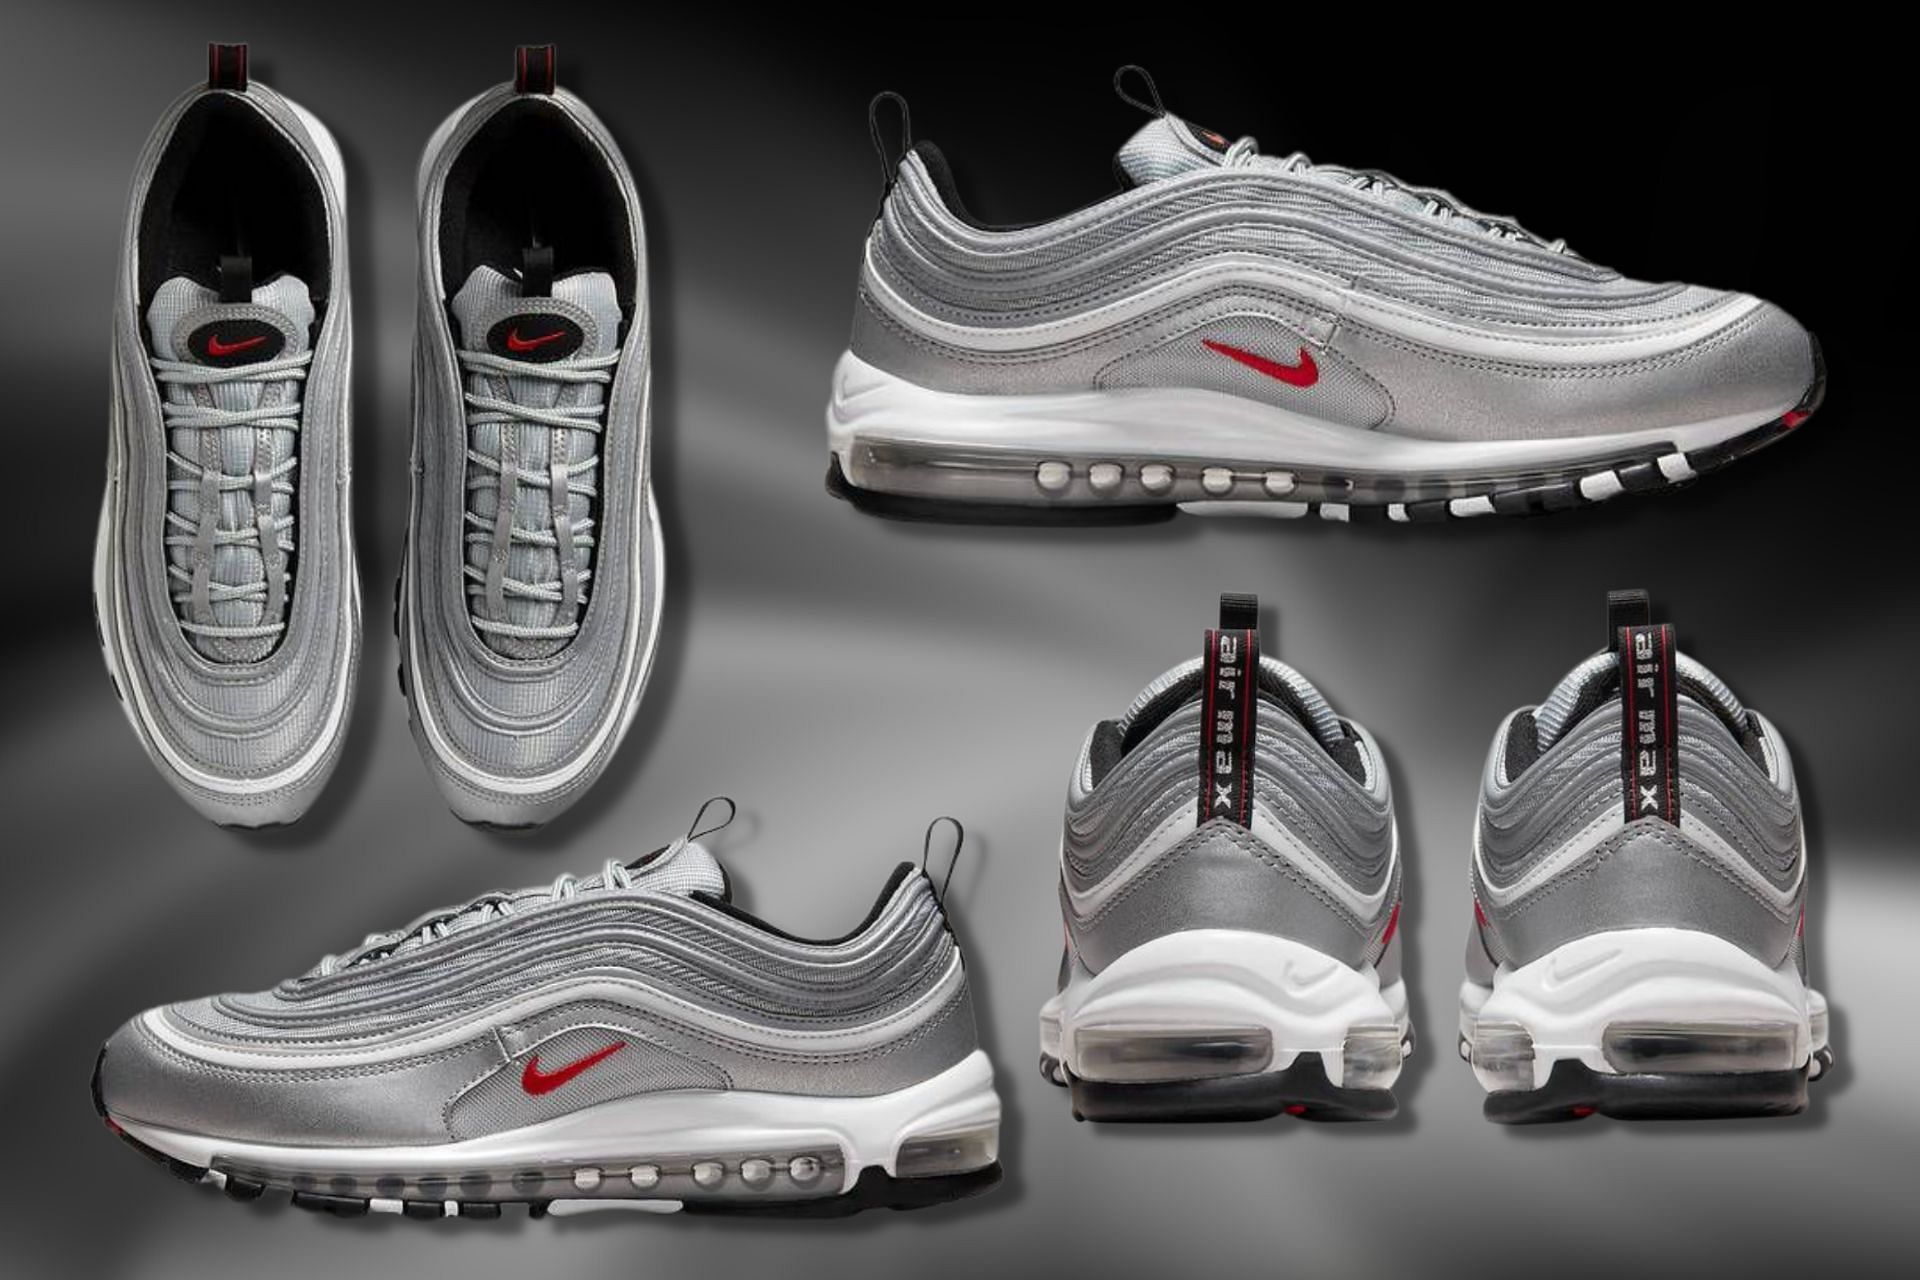 Take a closer look at the impending Nike Air Max 97 shoes (Image via Sportskeeda)